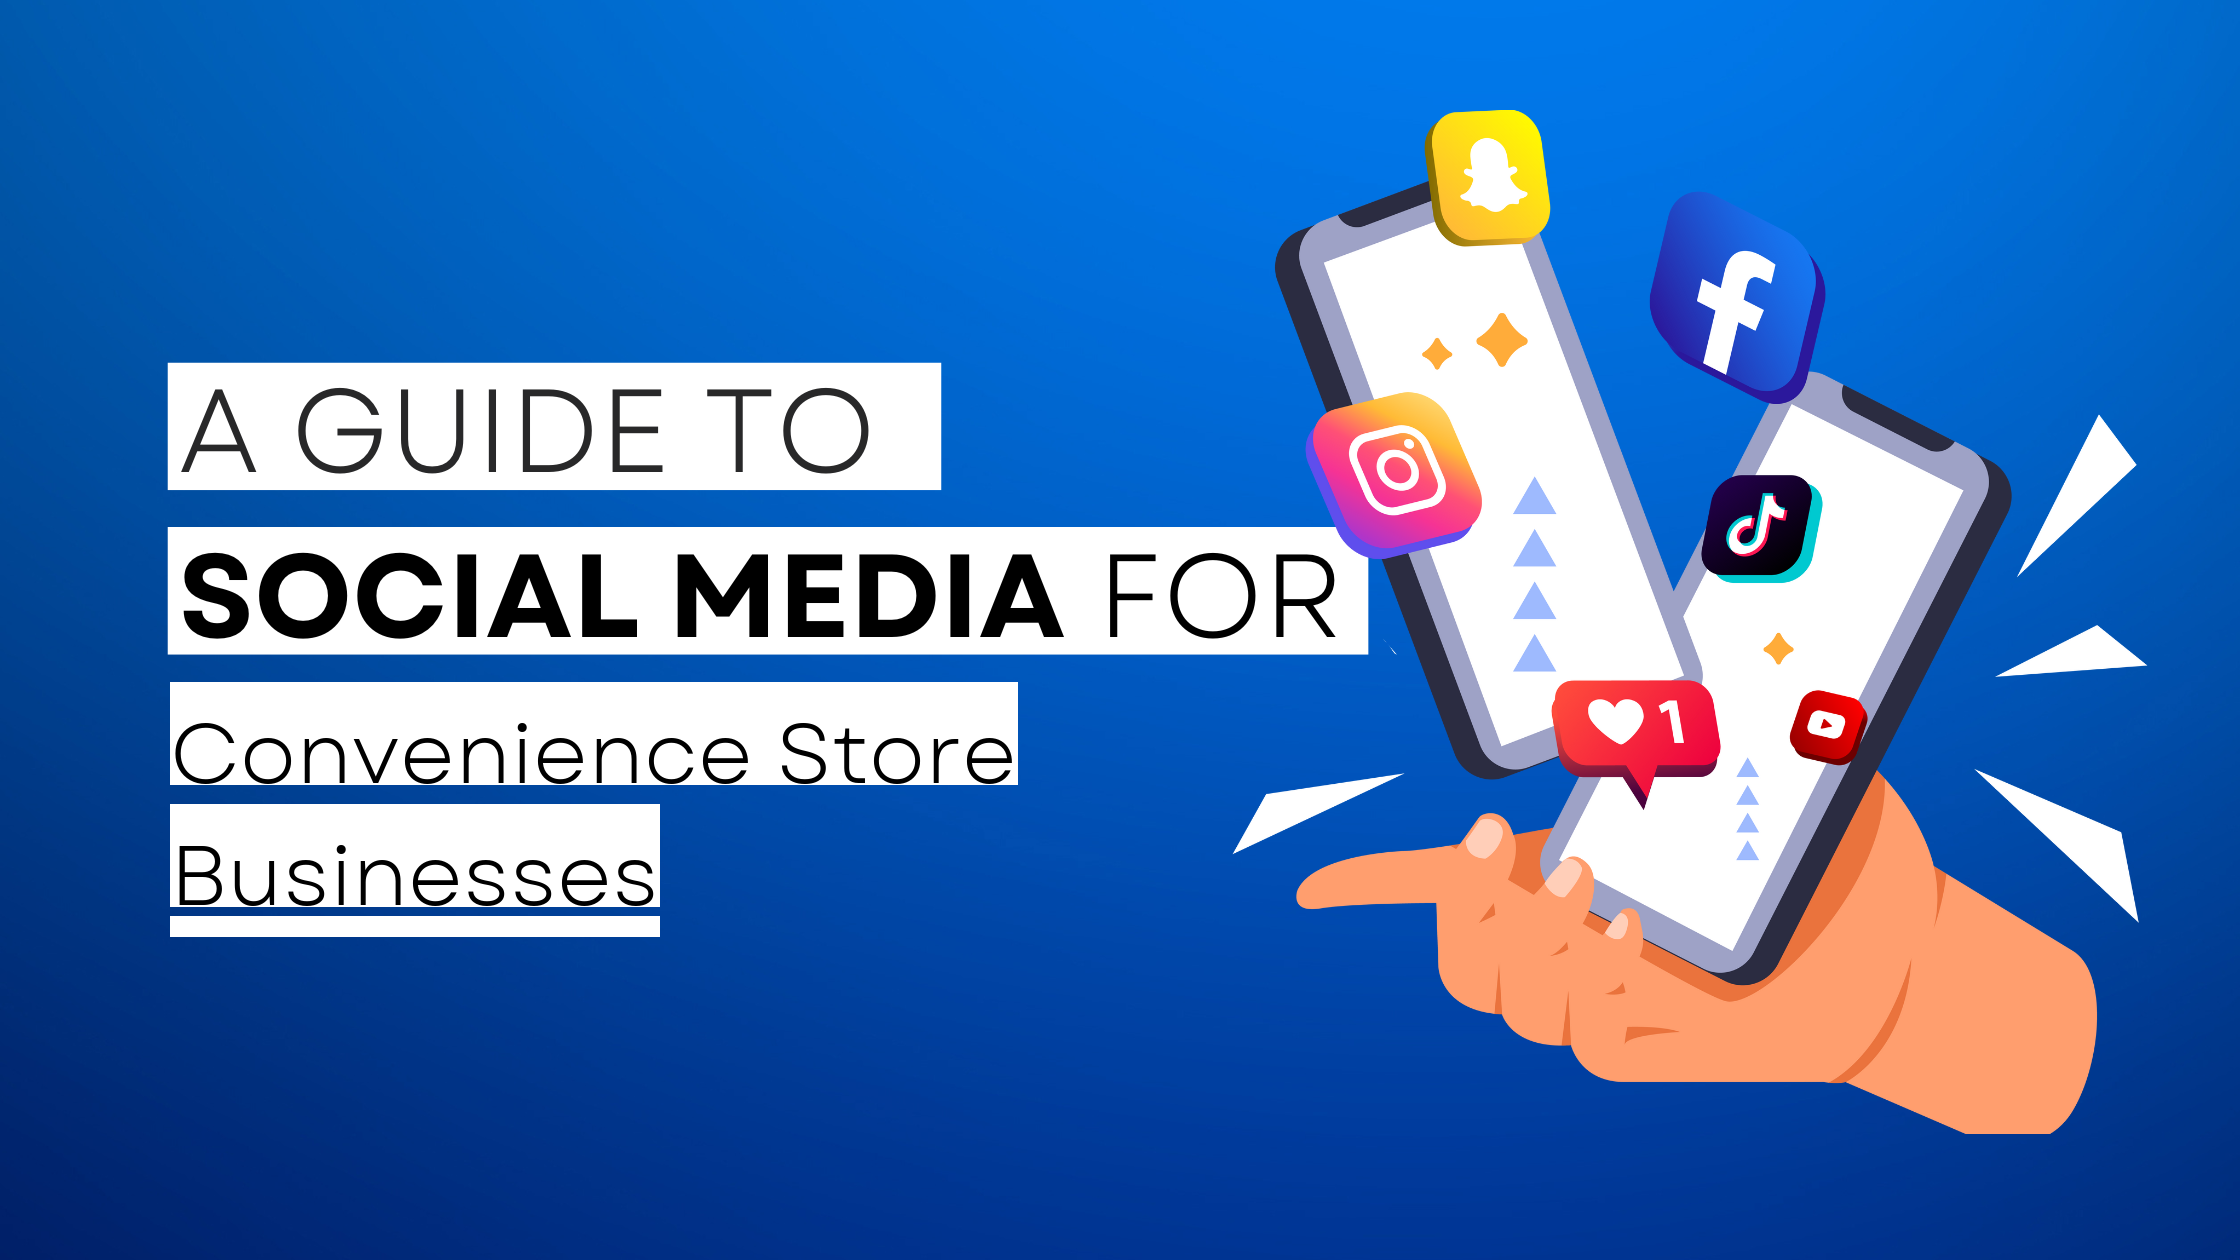 How to start Convenience Store on social media